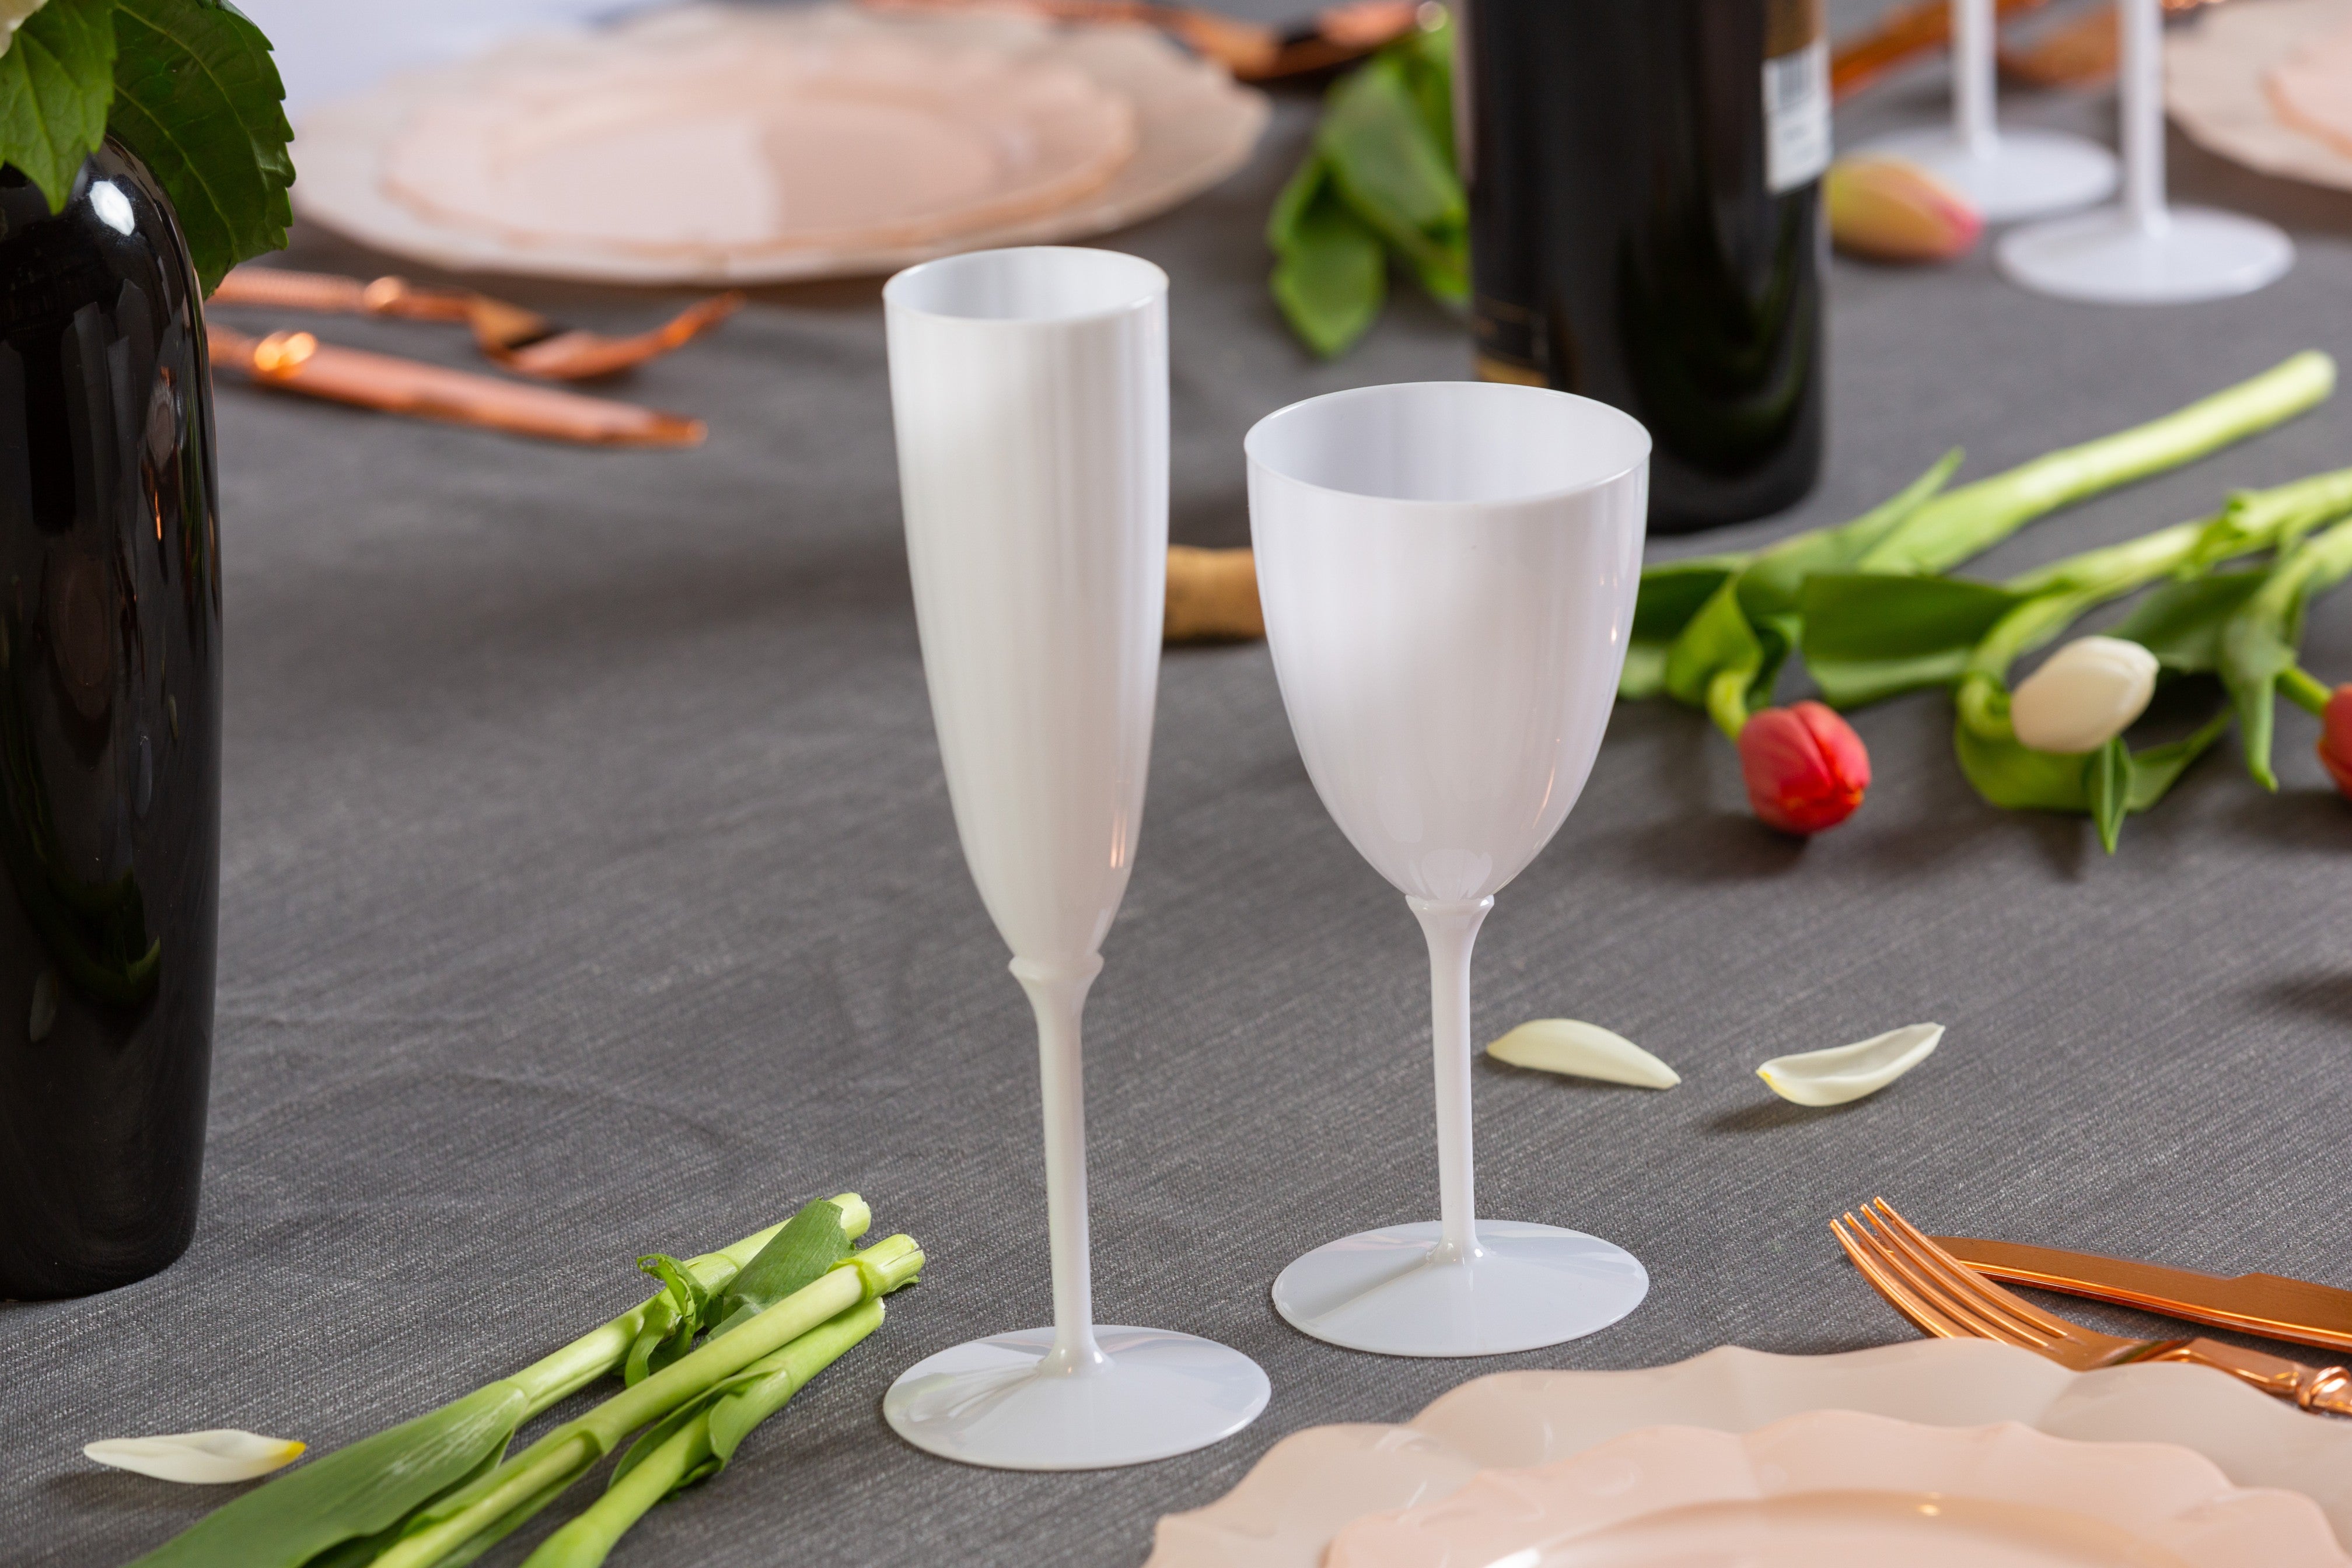 Decorline White Plastic Champagne Cups - 6 oz. (Pack of 8) - Premium Party Flutes for Gatherings, Events, and Celebrations